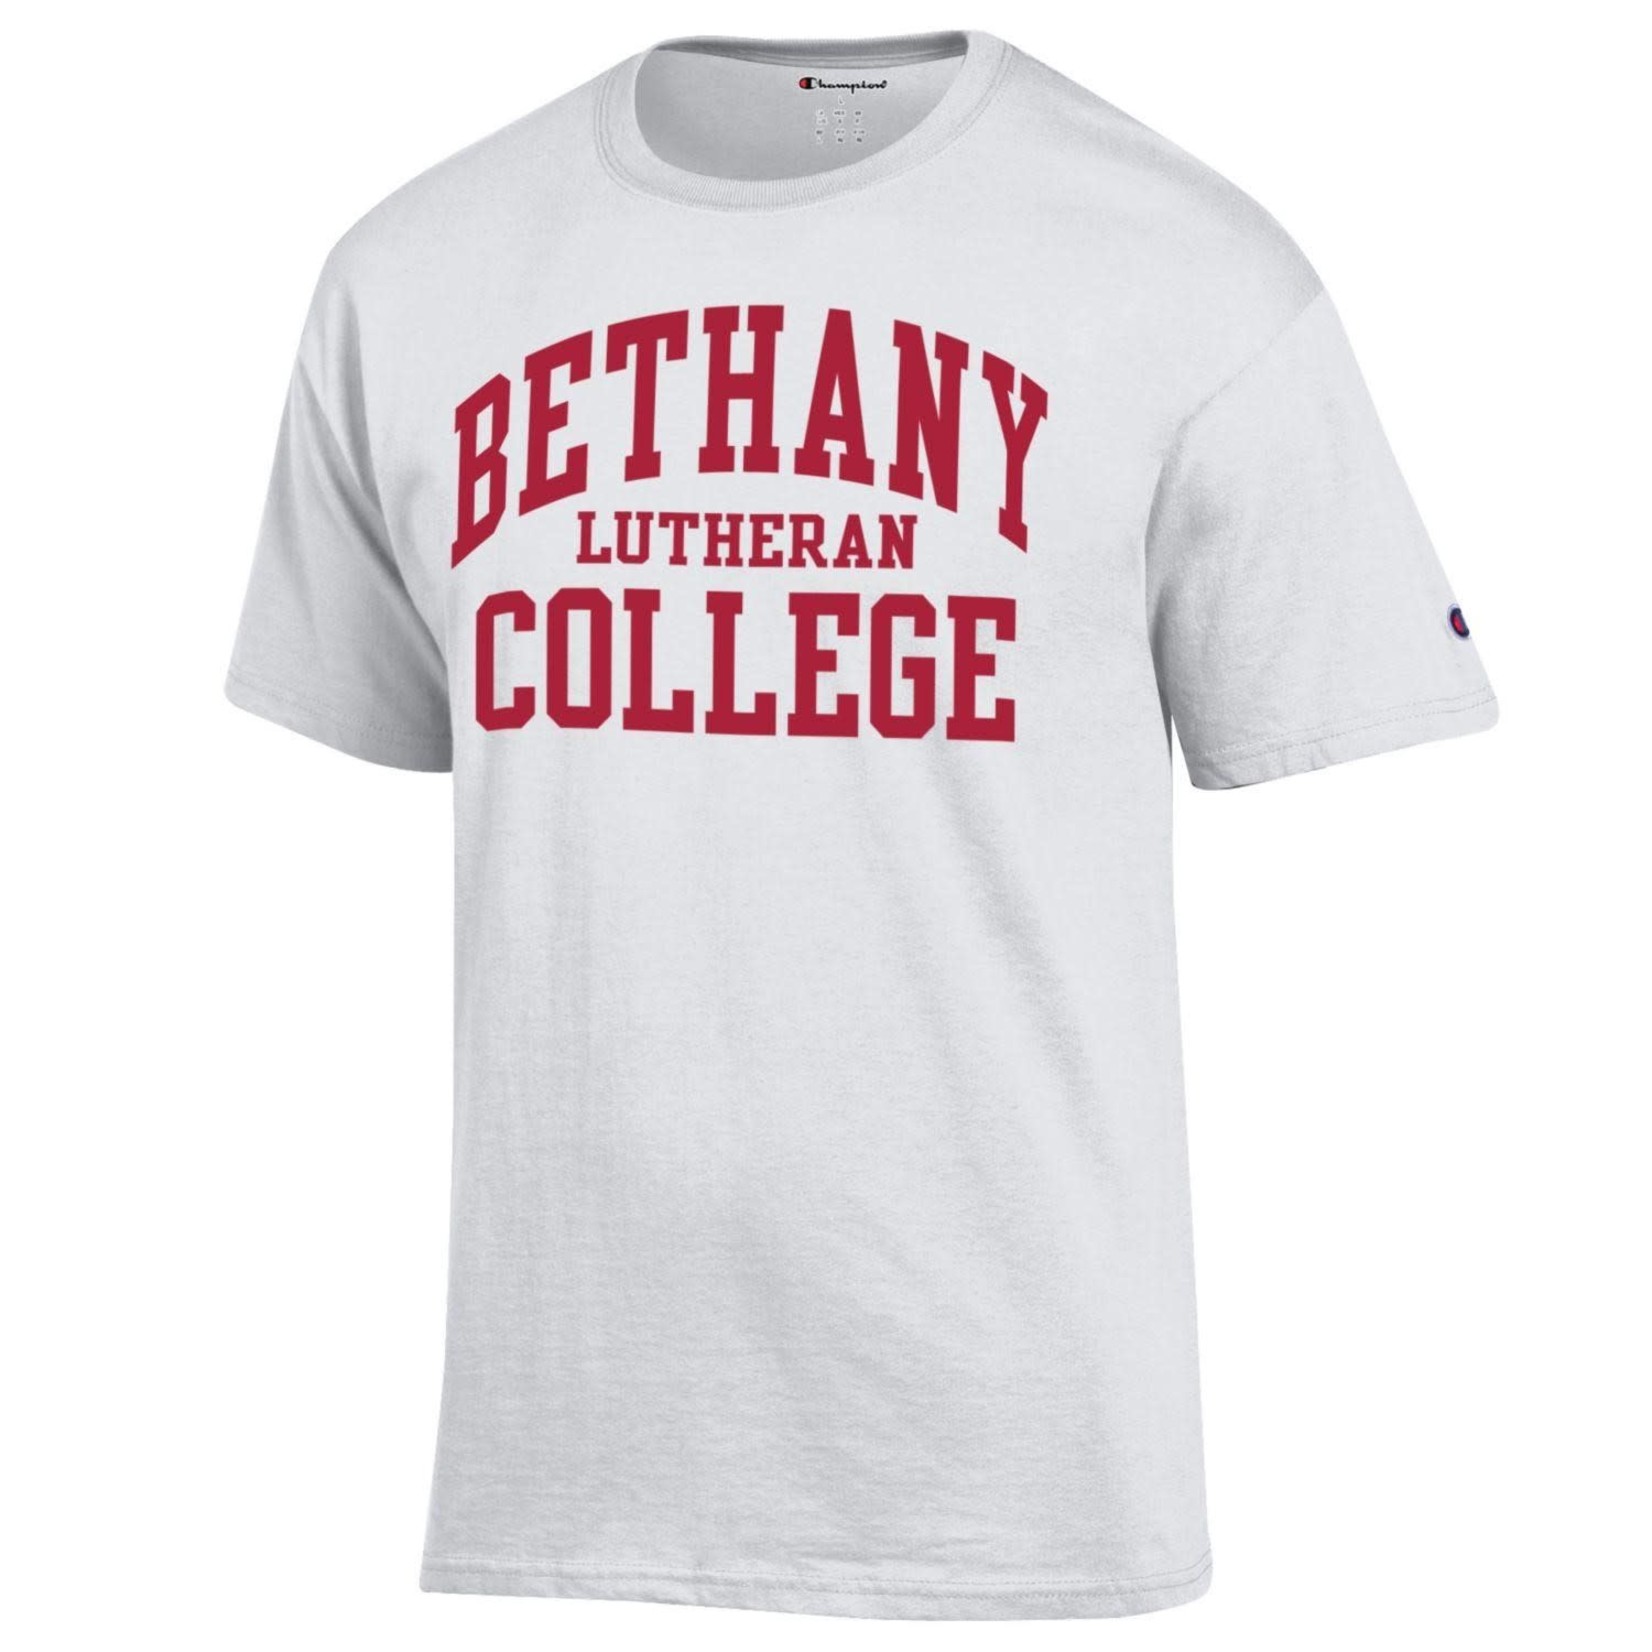 Champion Bethany Lutheran College T-Shirt